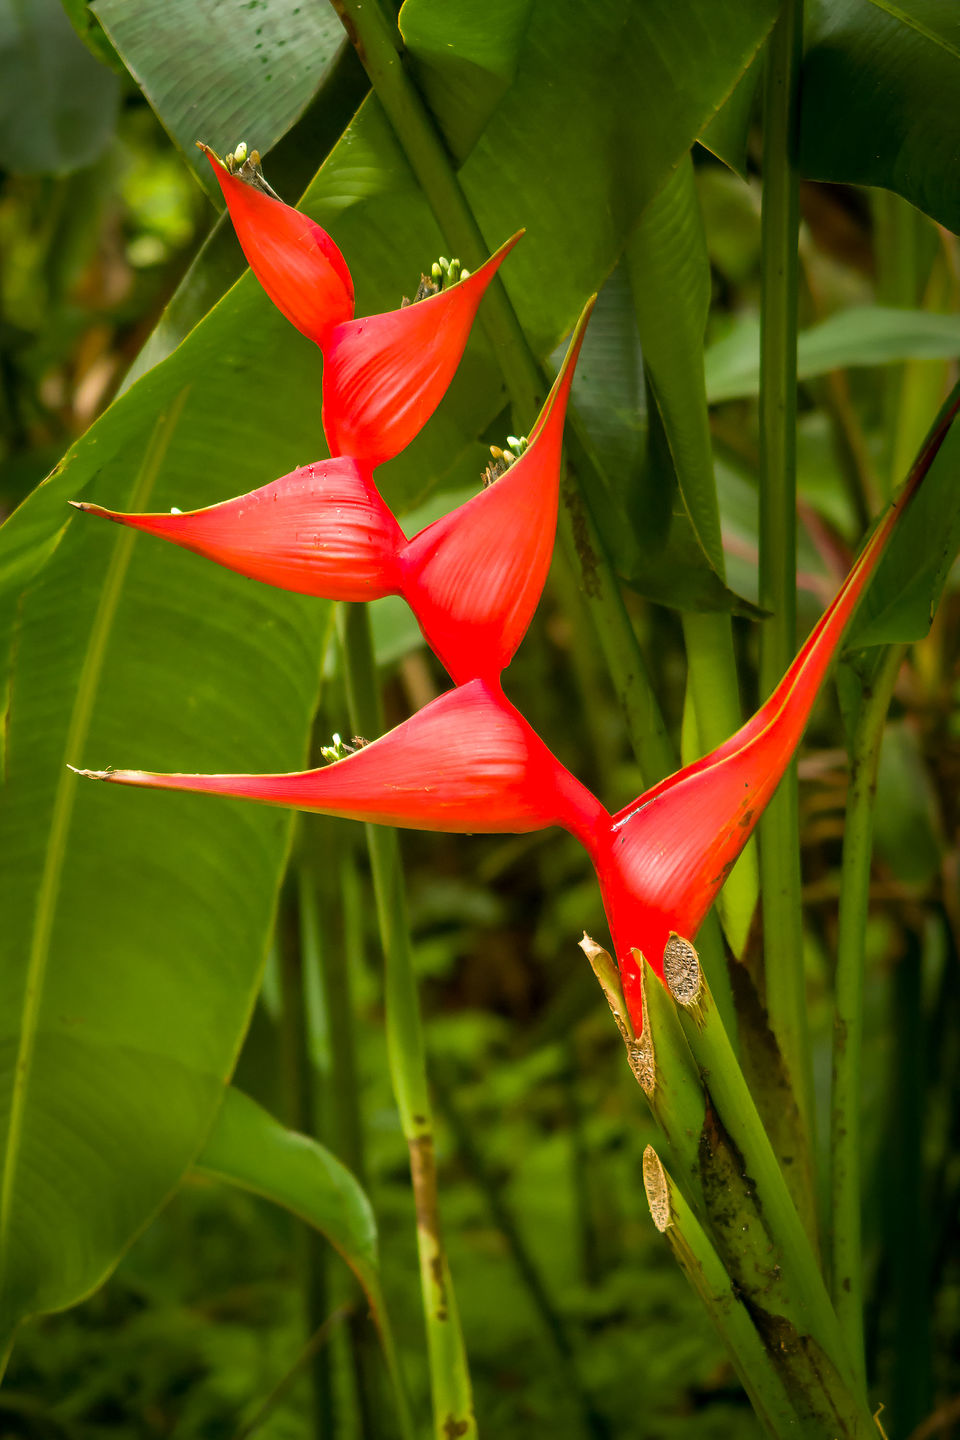 Heliconia in Hawaii Tropical Botanical Garden